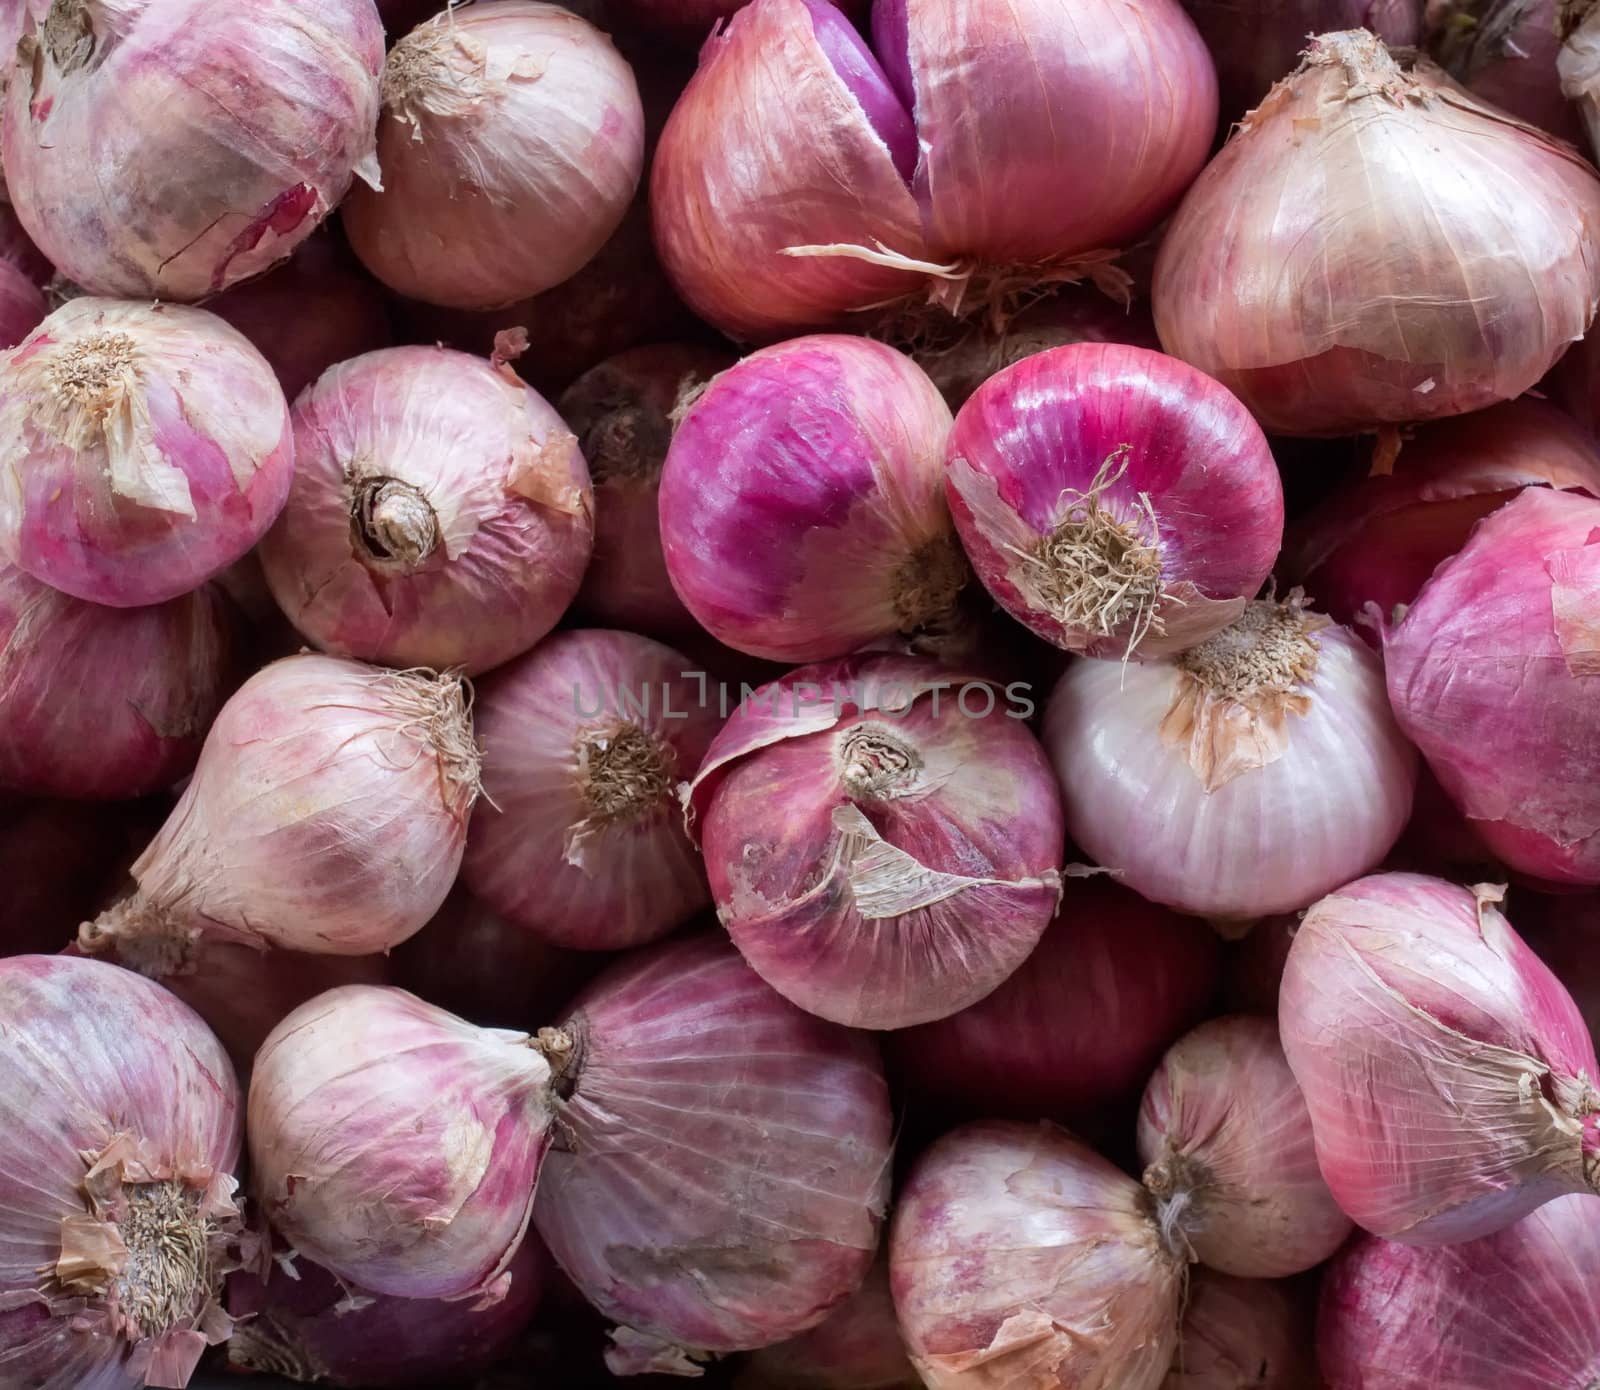 red onions by zkruger